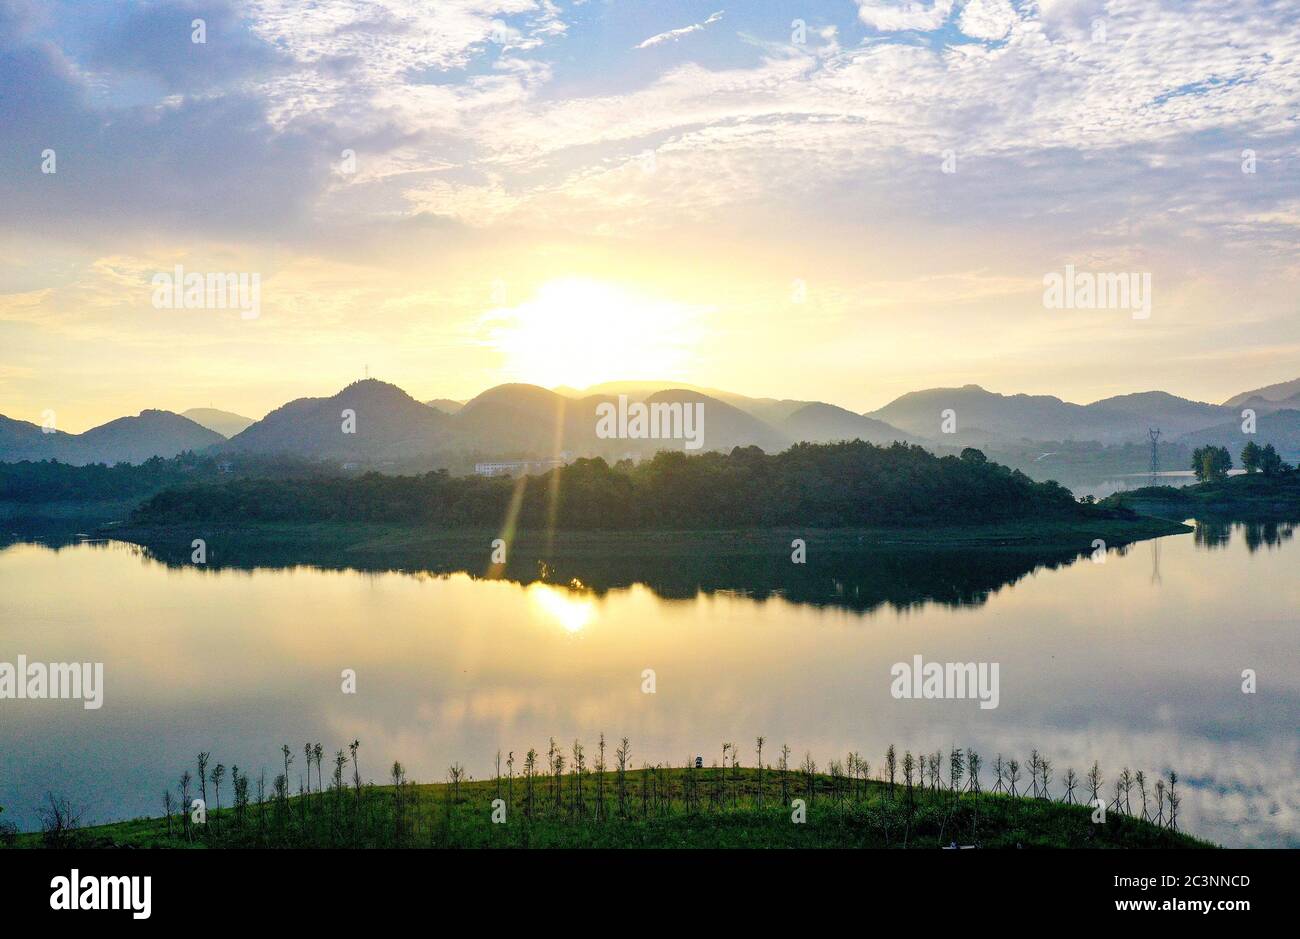 June 22, 2020, Guangan, Guangan, China: SichuanÃ¯Â¼Å'CHINA-Located in The town of Huaying City, Tianchi Lake of Guang 'an City, Sichuan Province, is the mountain lake with the largest area and the highest altitude in eastern Sichuan. In the 1950s and 1960s, a number of highly polluting enterprises were built in the lake, and the number of livestock and poultry farms increased year by year, resulting in serious pollution of the lake and worsening of the environment. In recent years, Huaying has actively practiced the concept of ecological civilization, protected clean water and green mountains, Stock Photo